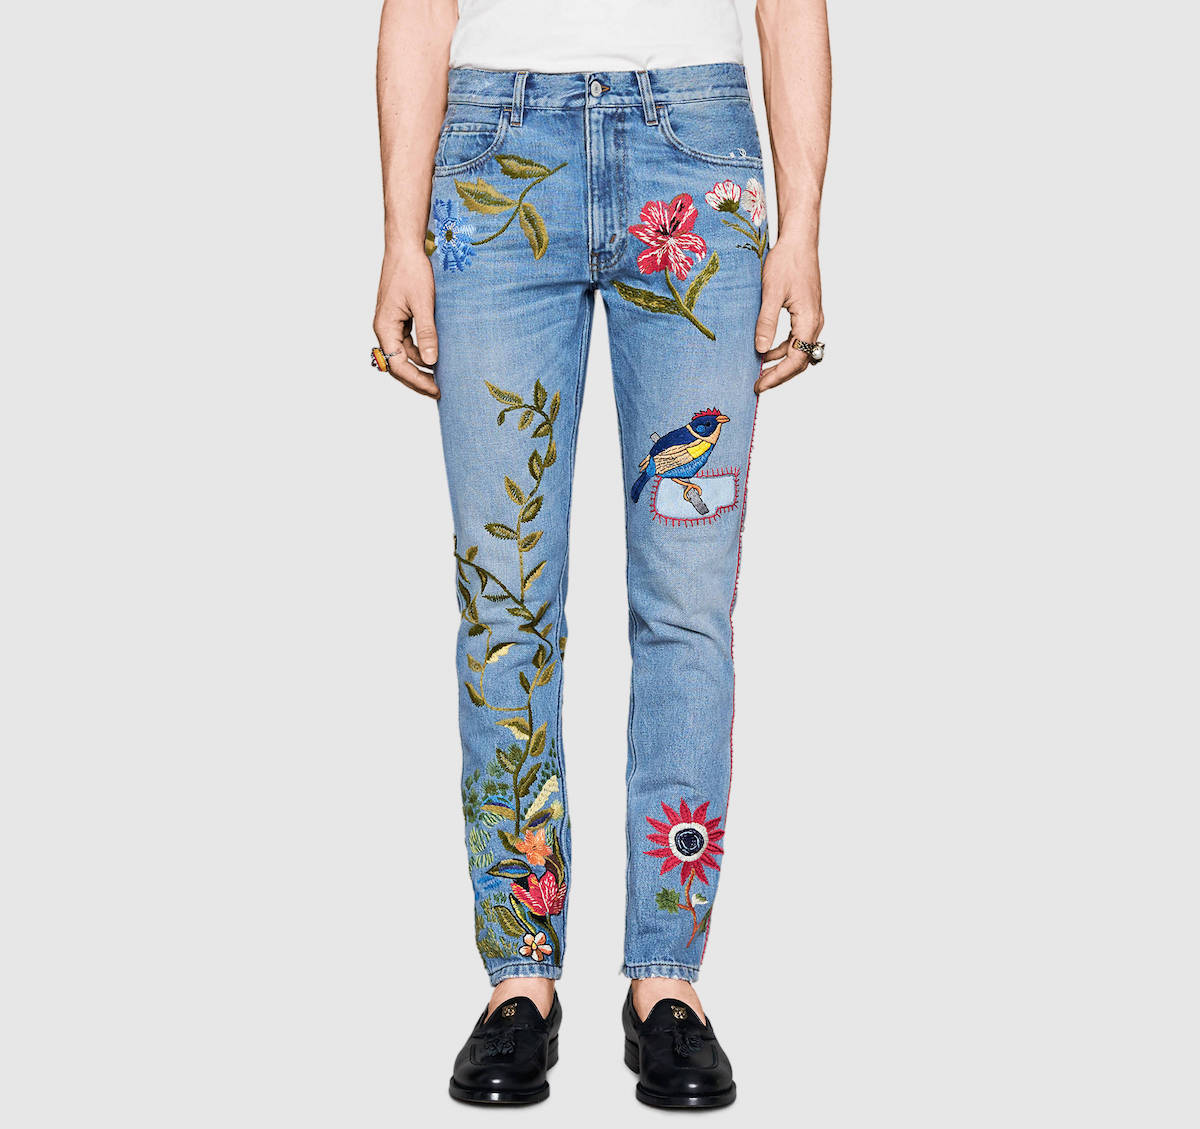 gucci-light-embroidered-denim-jeans-2